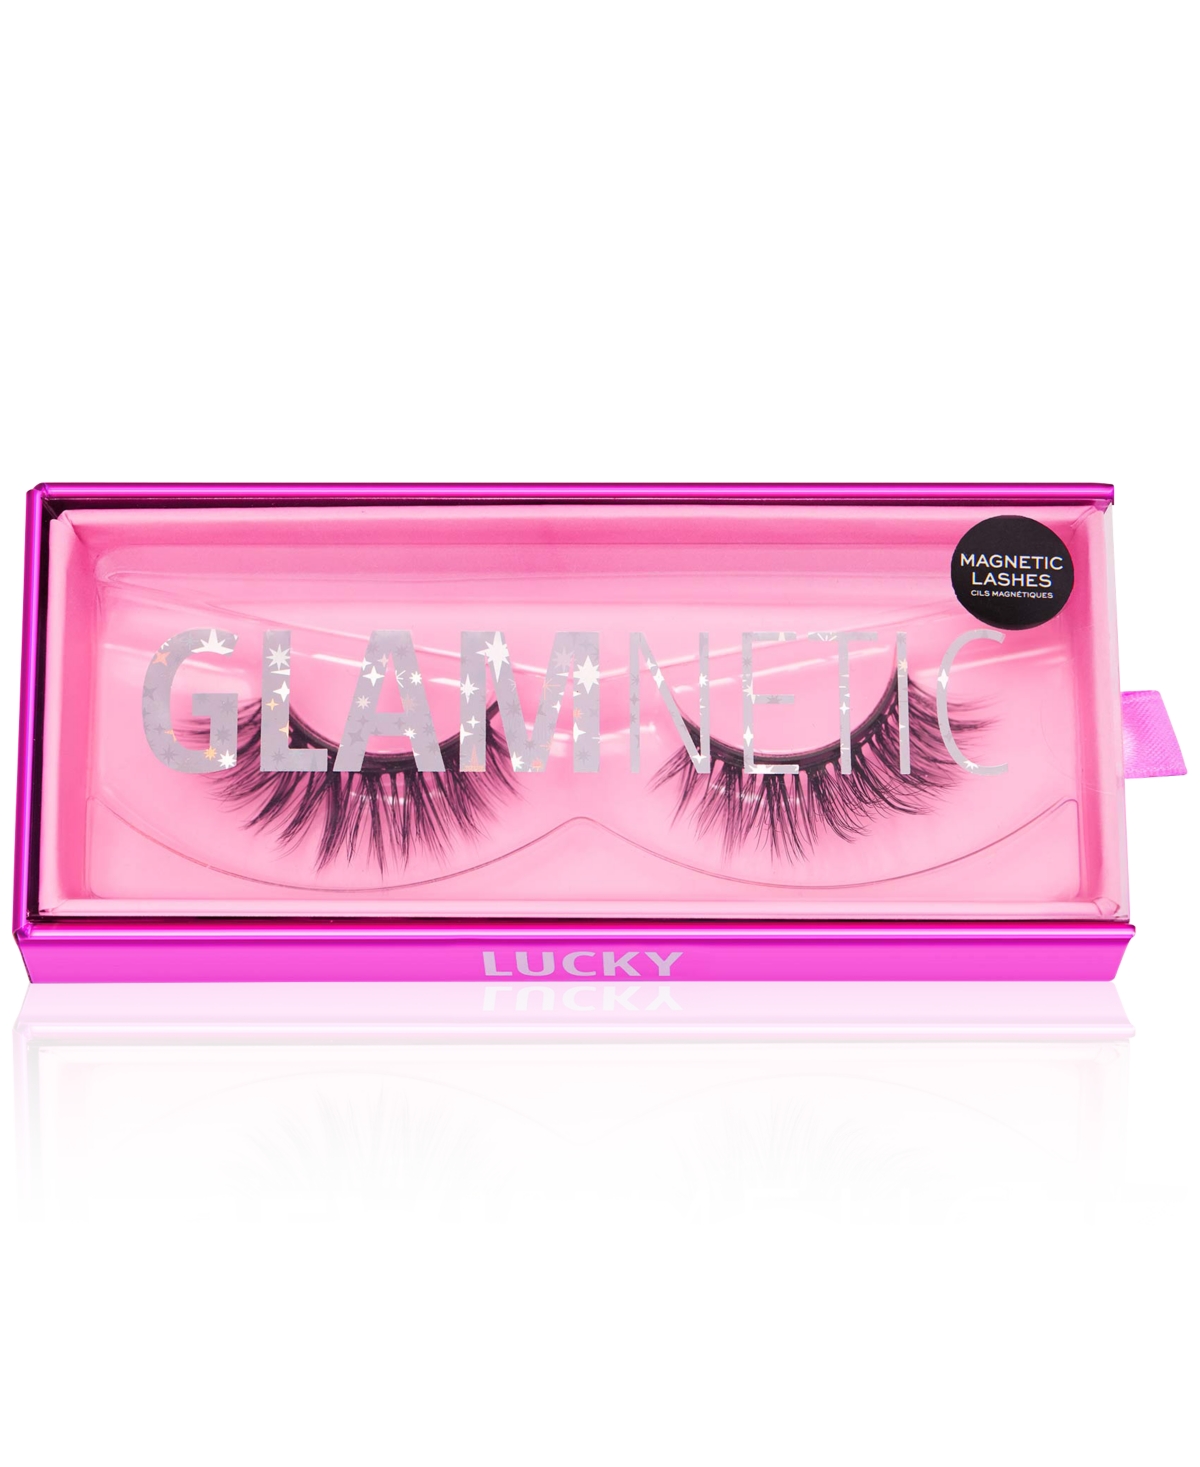 Magnetic Lashes - Lucky - Black